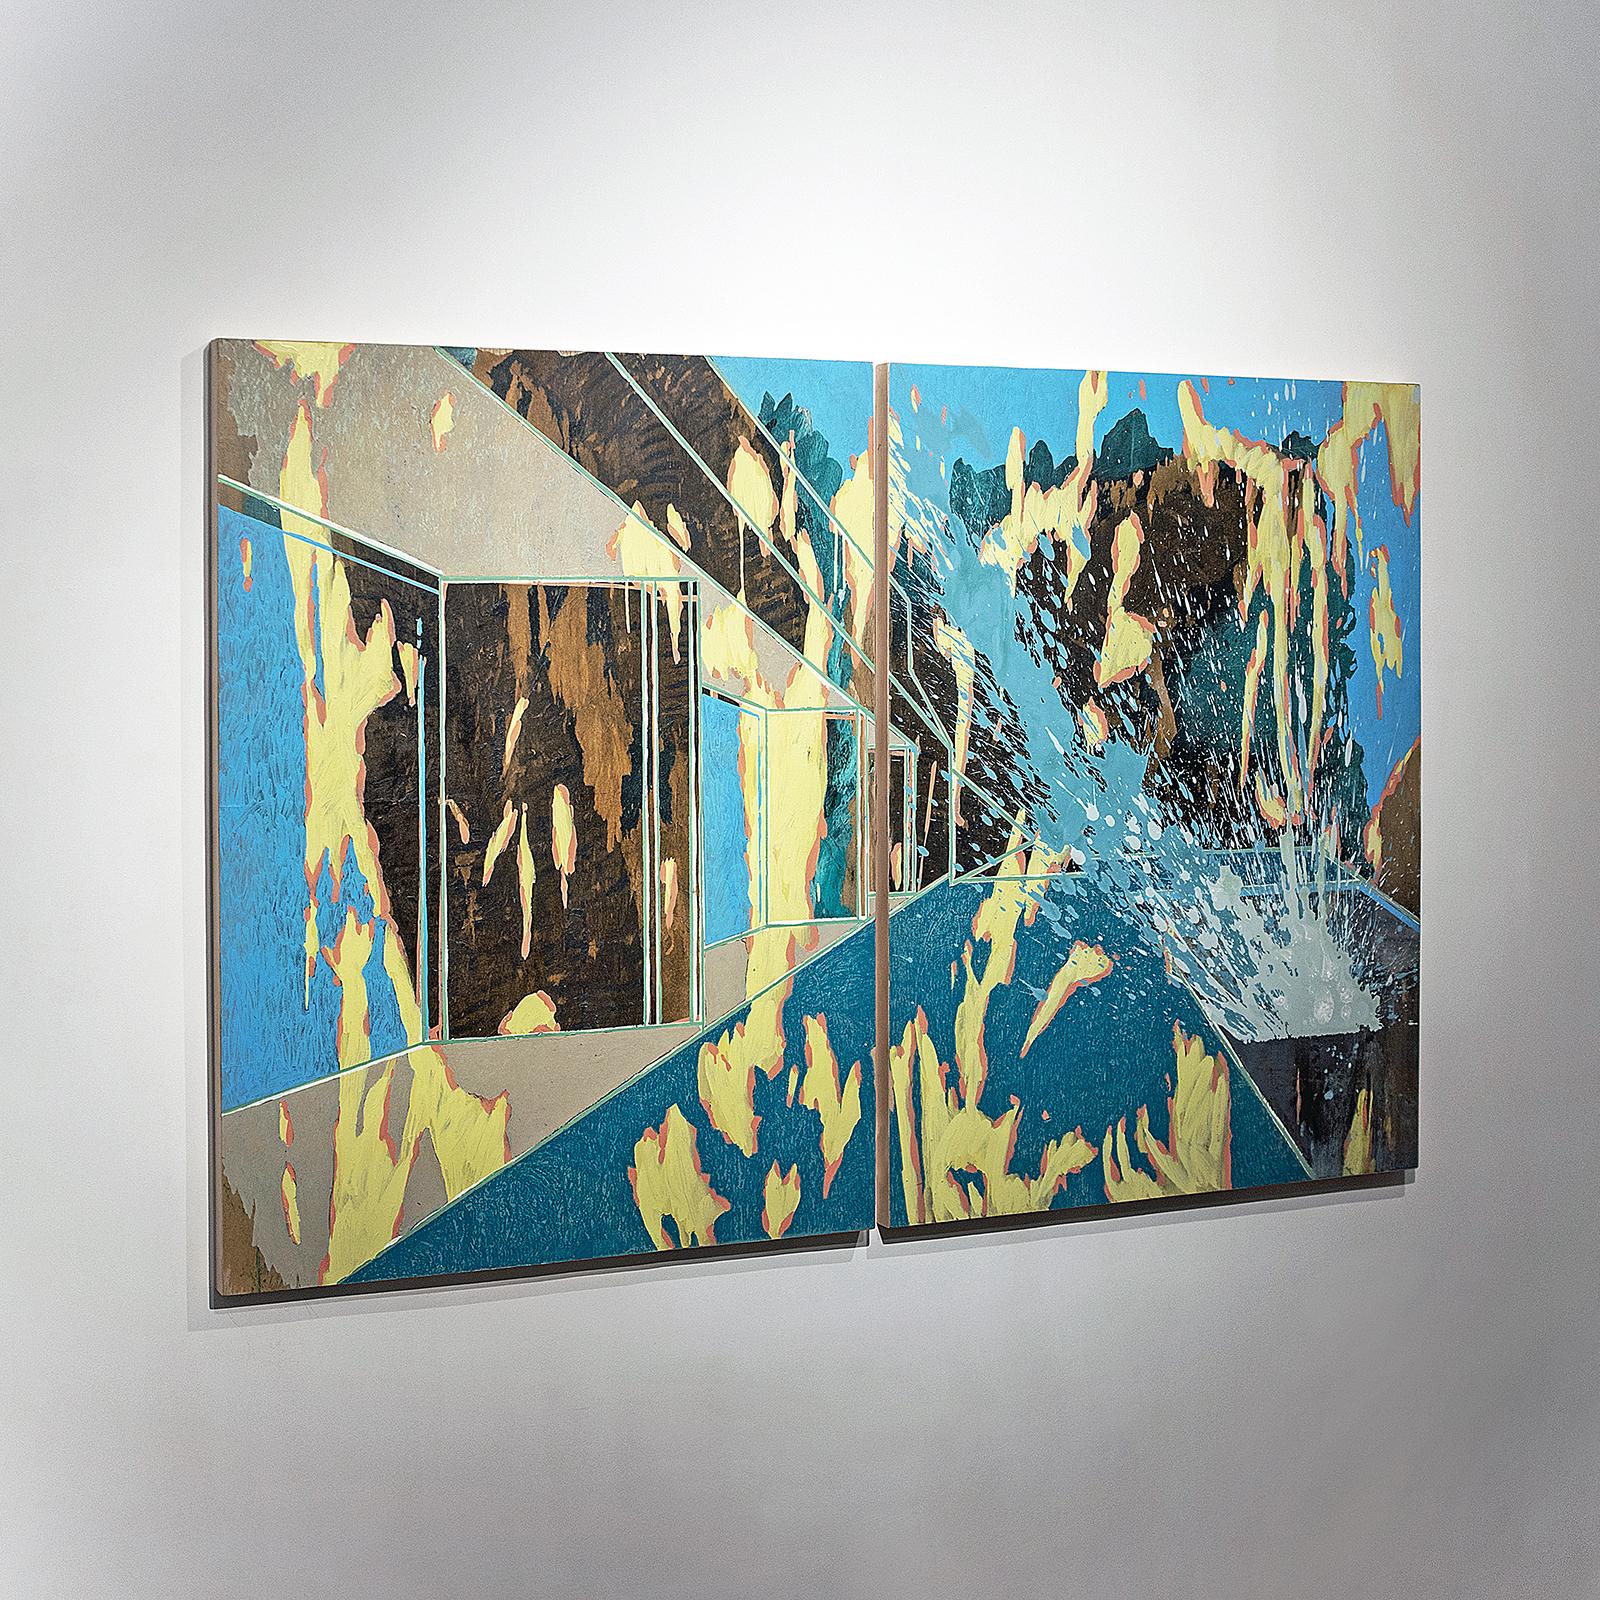 Paper, enamel, oil and graphite on board, diptych measuring 130 x 200 x 4 cm.